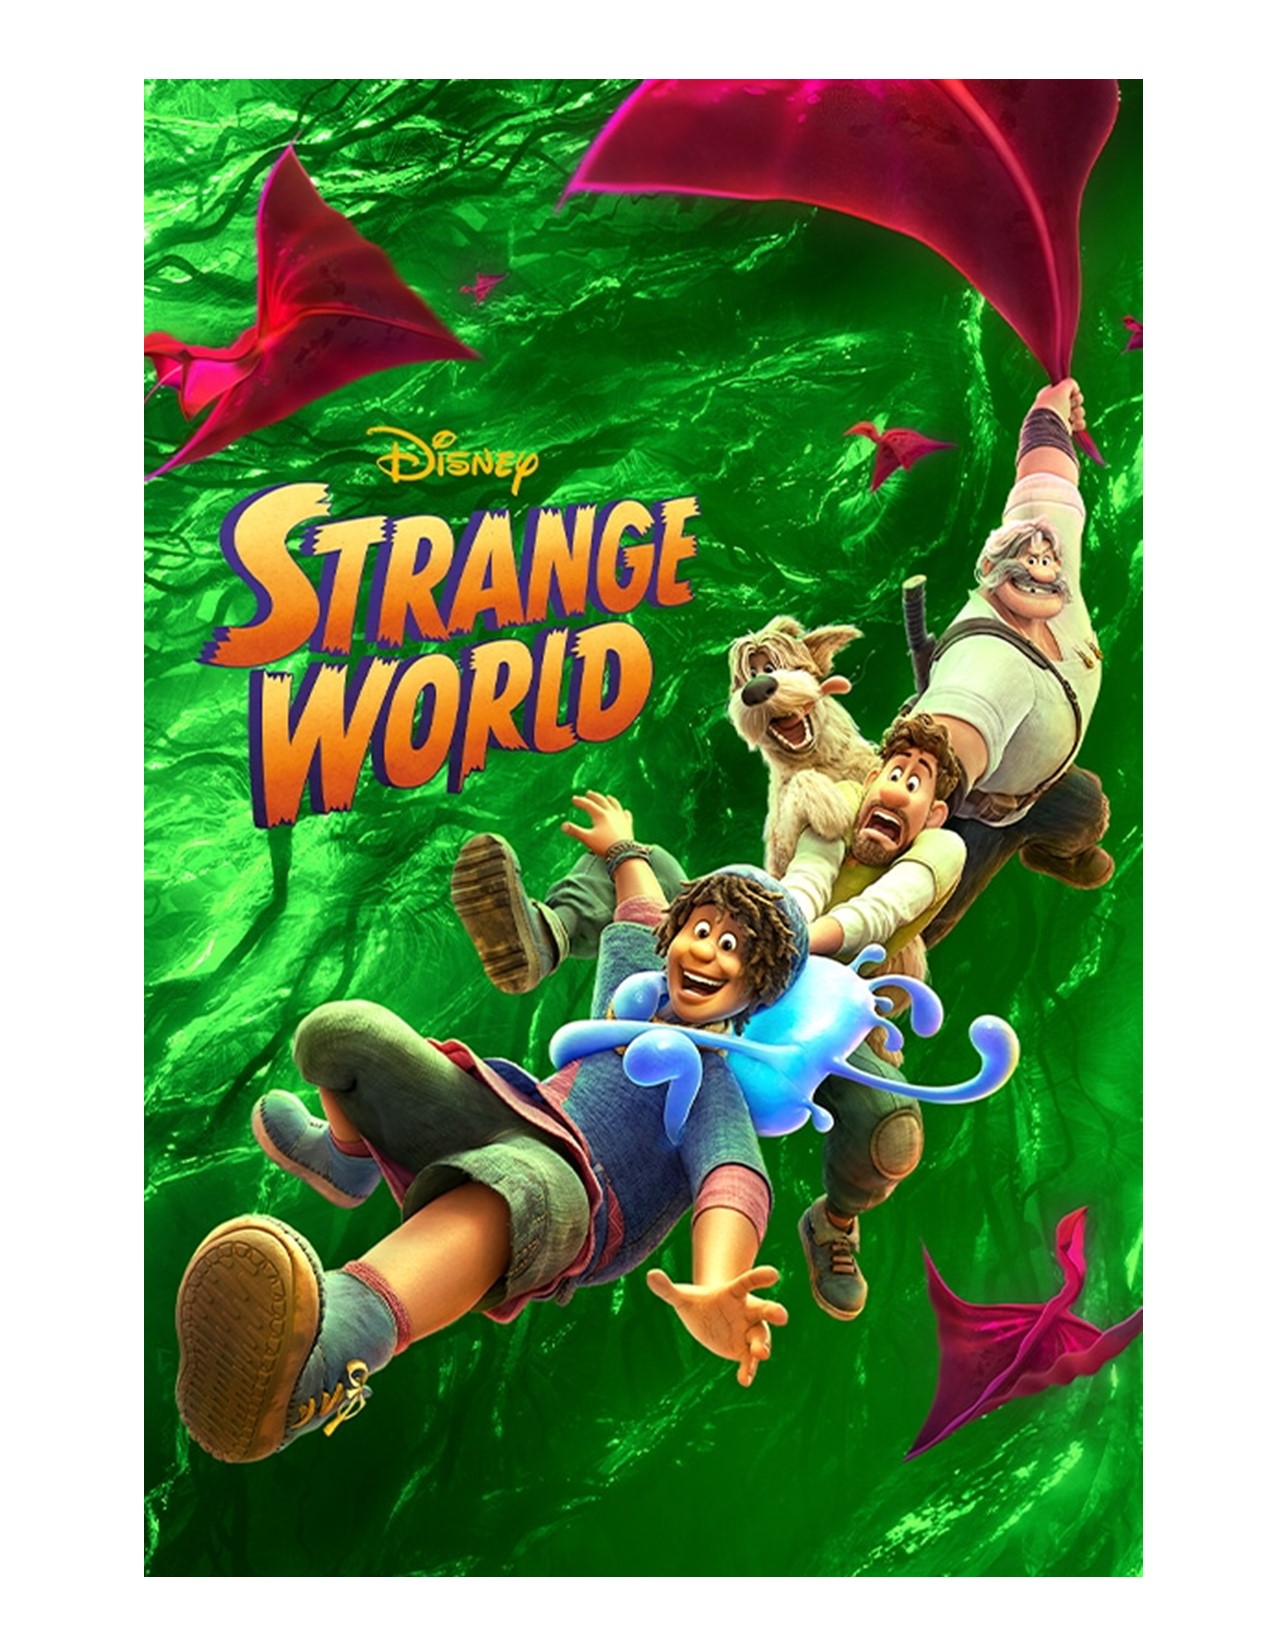 Movie poster showing characters holding onto a purple creature above a sea of green slime.